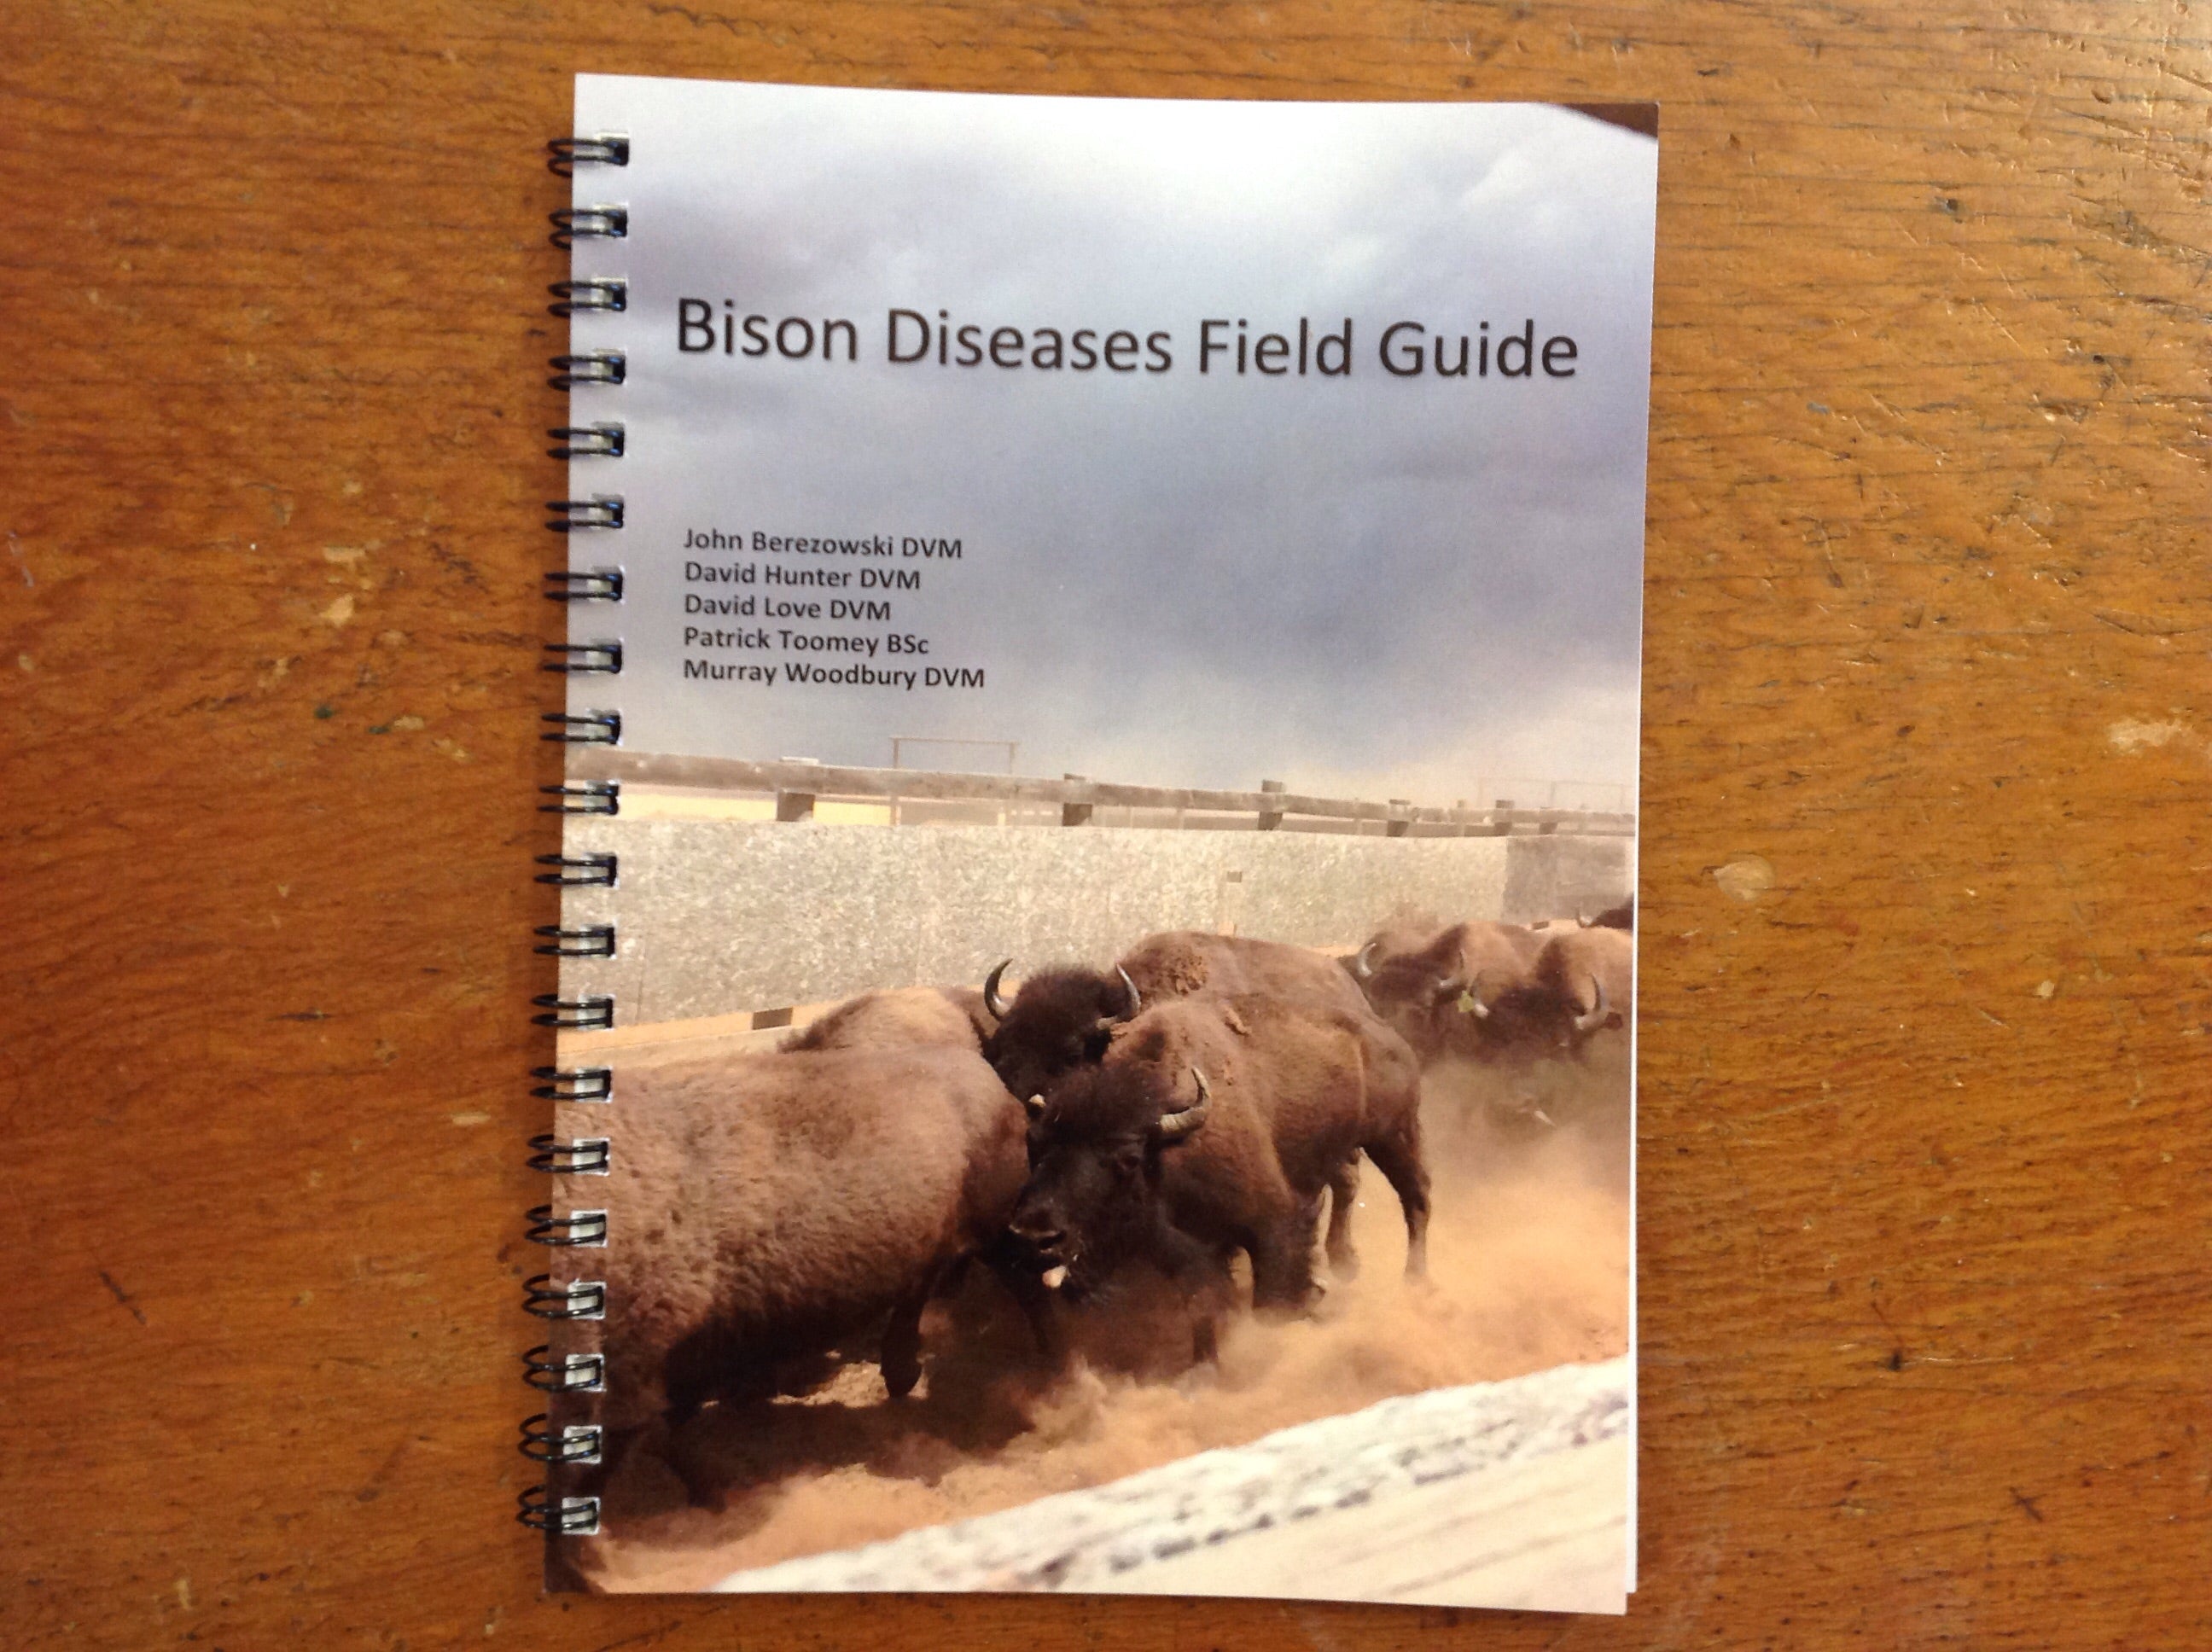 BOOKS - Bison Diseases Field Guide